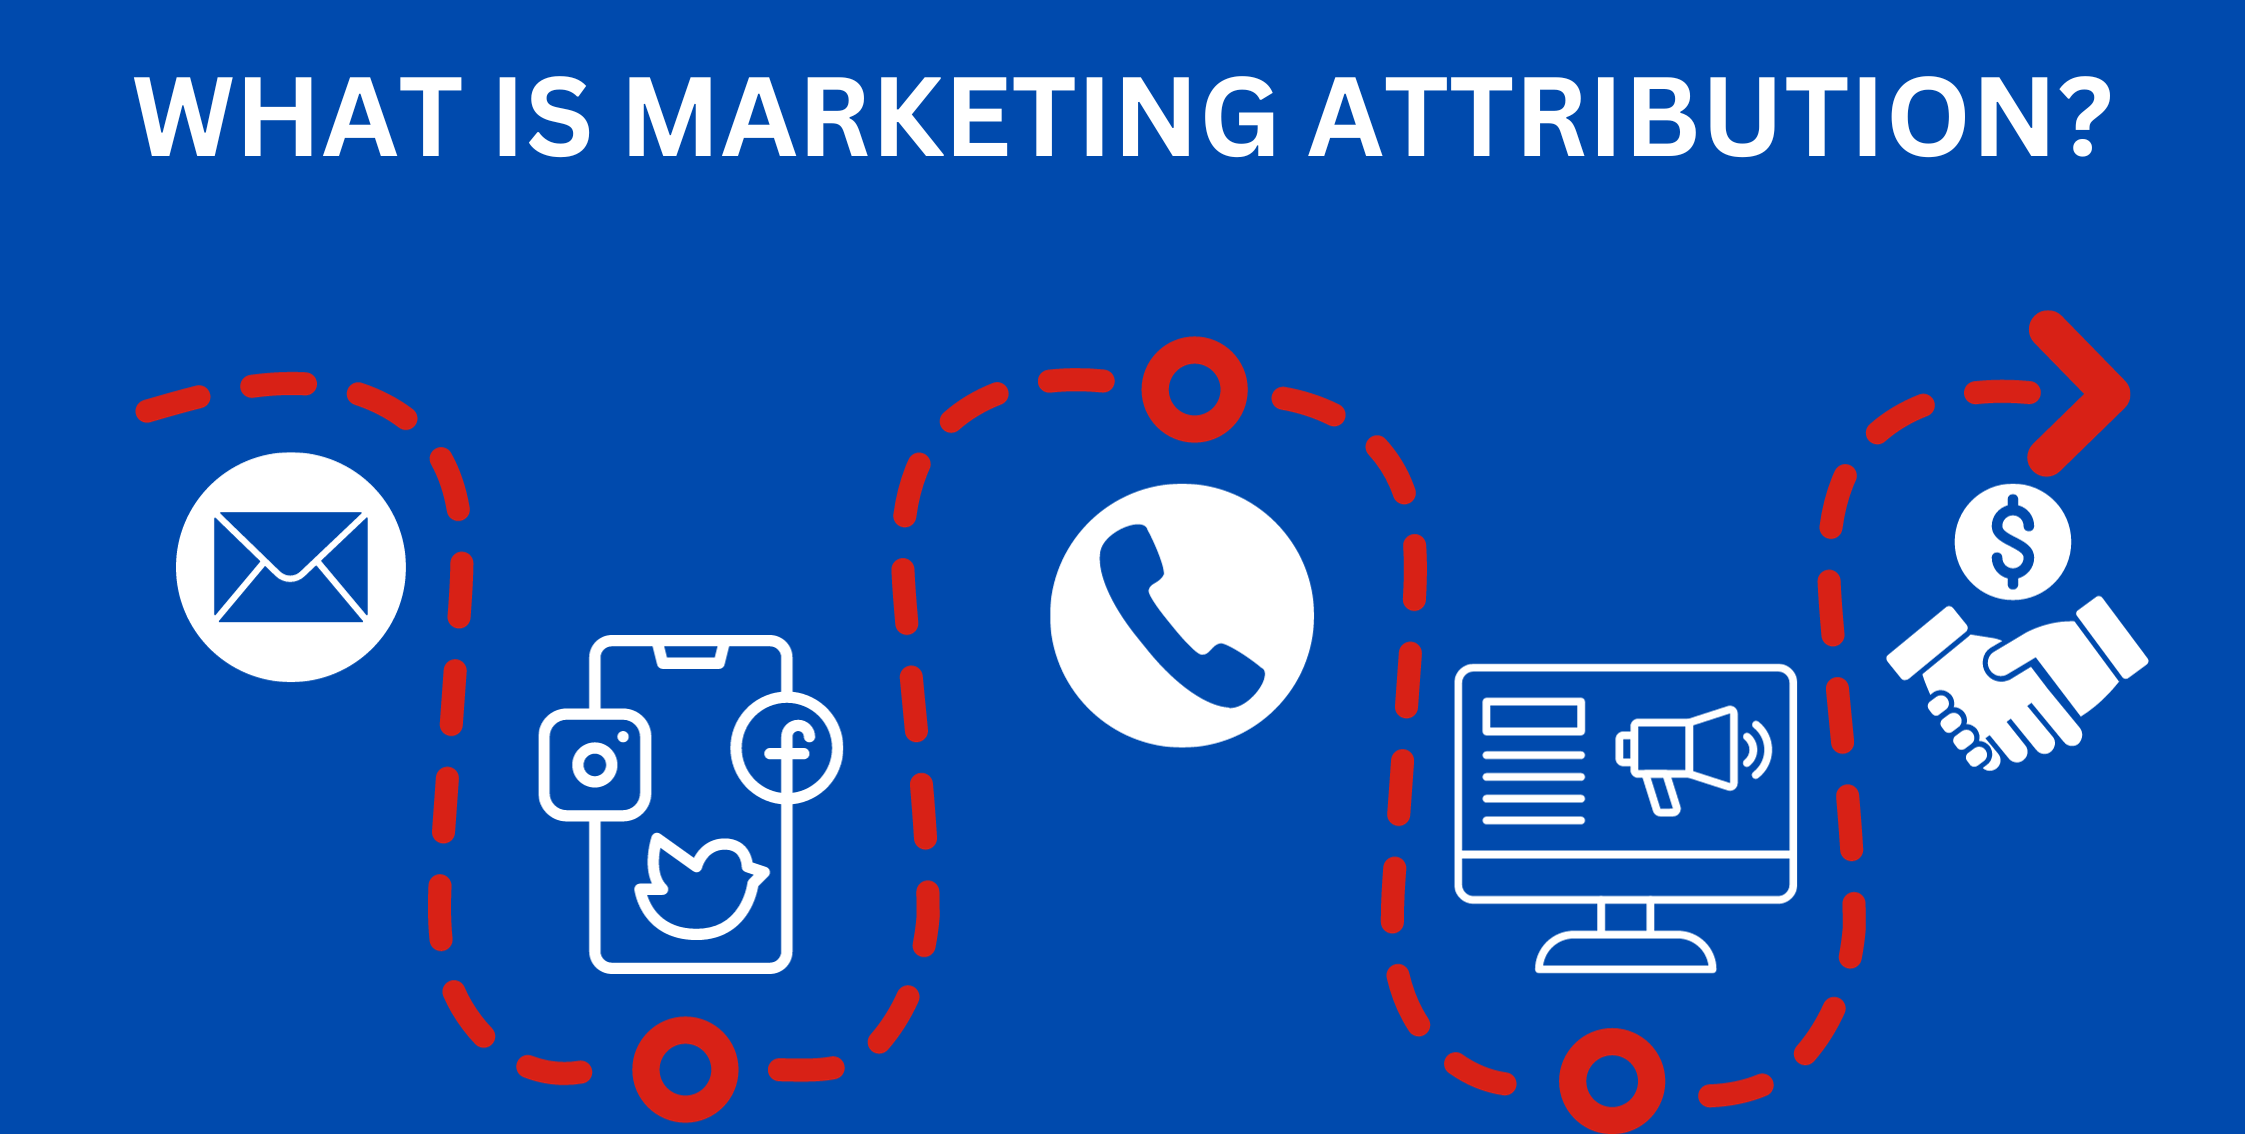 What is Marketing Attribution?